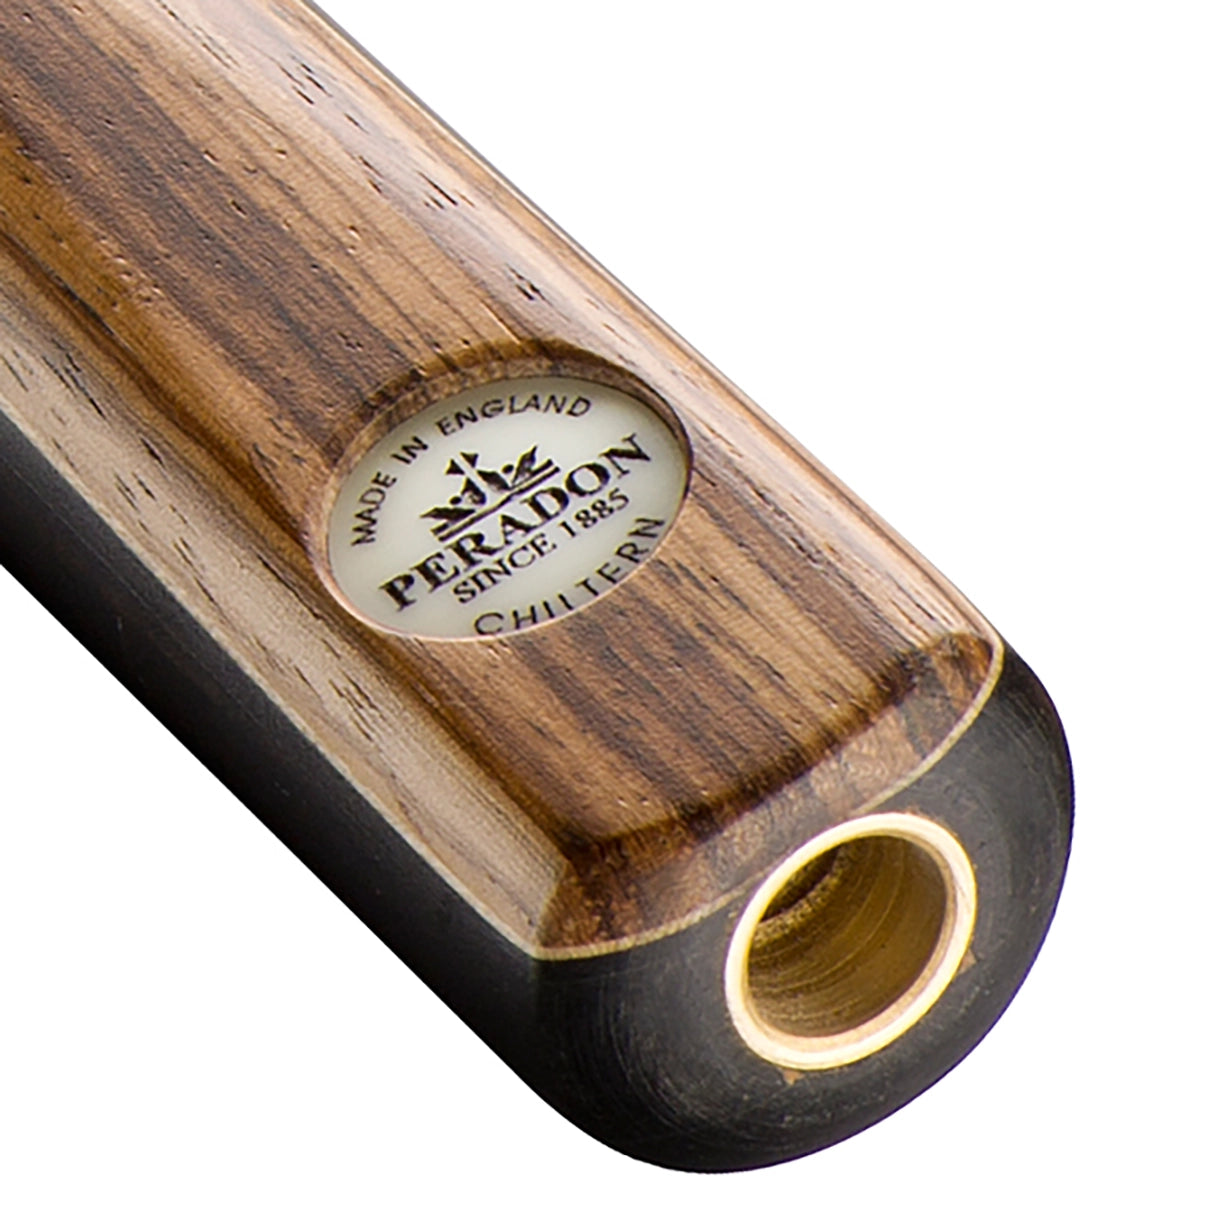 Peradon Chiltern 3/4 Jointed Snooker Cue. Badge view